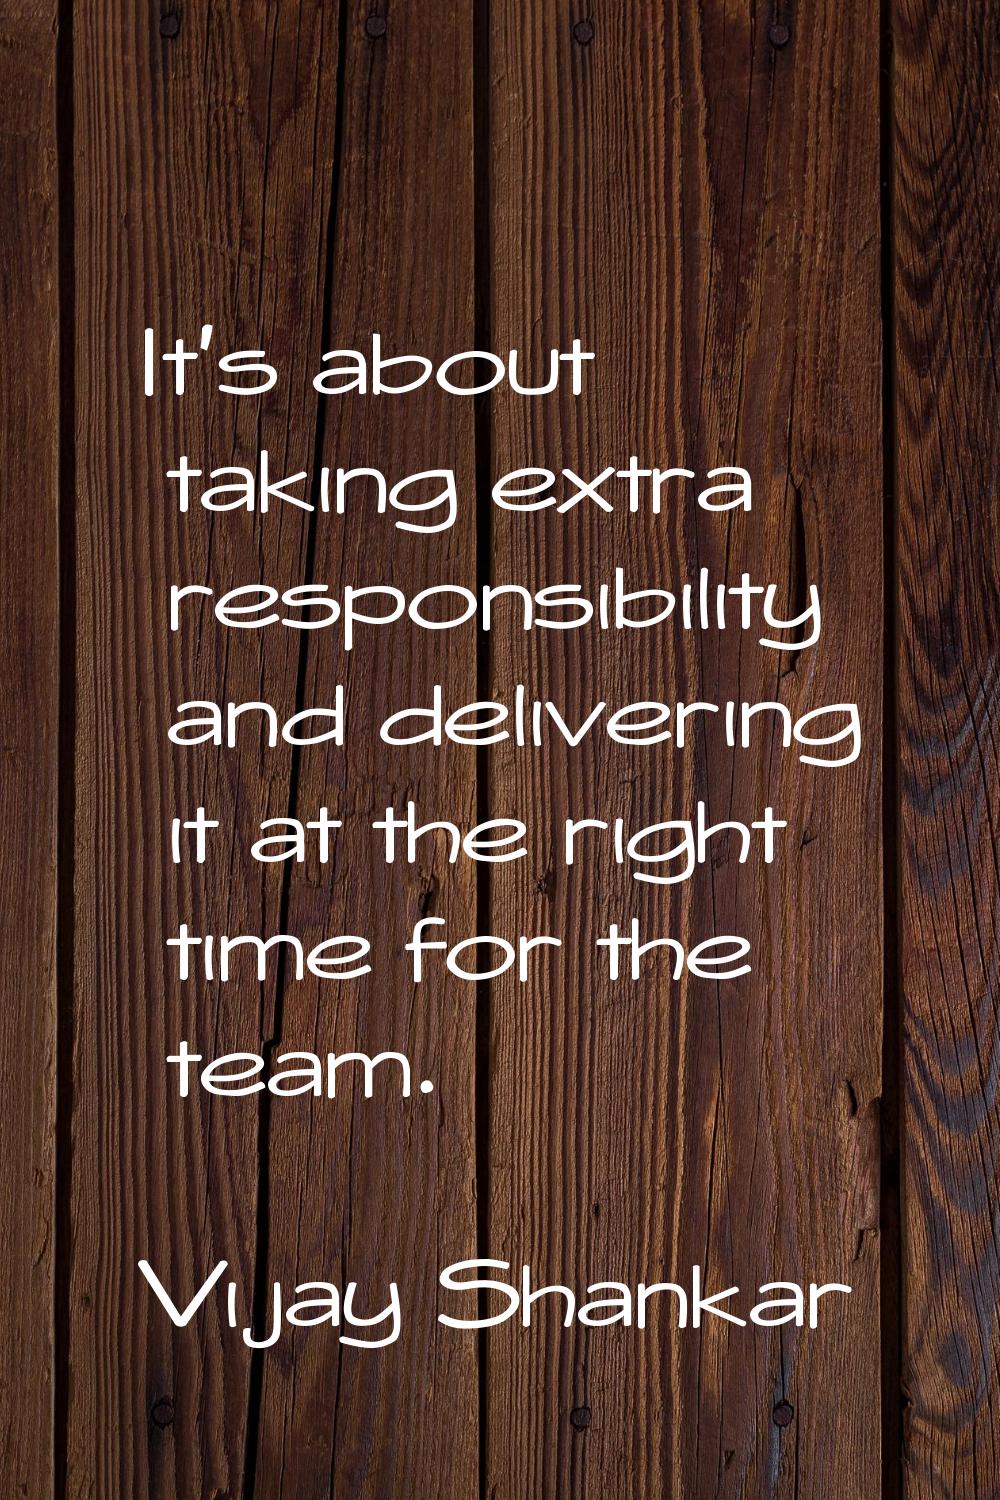 It's about taking extra responsibility and delivering it at the right time for the team.